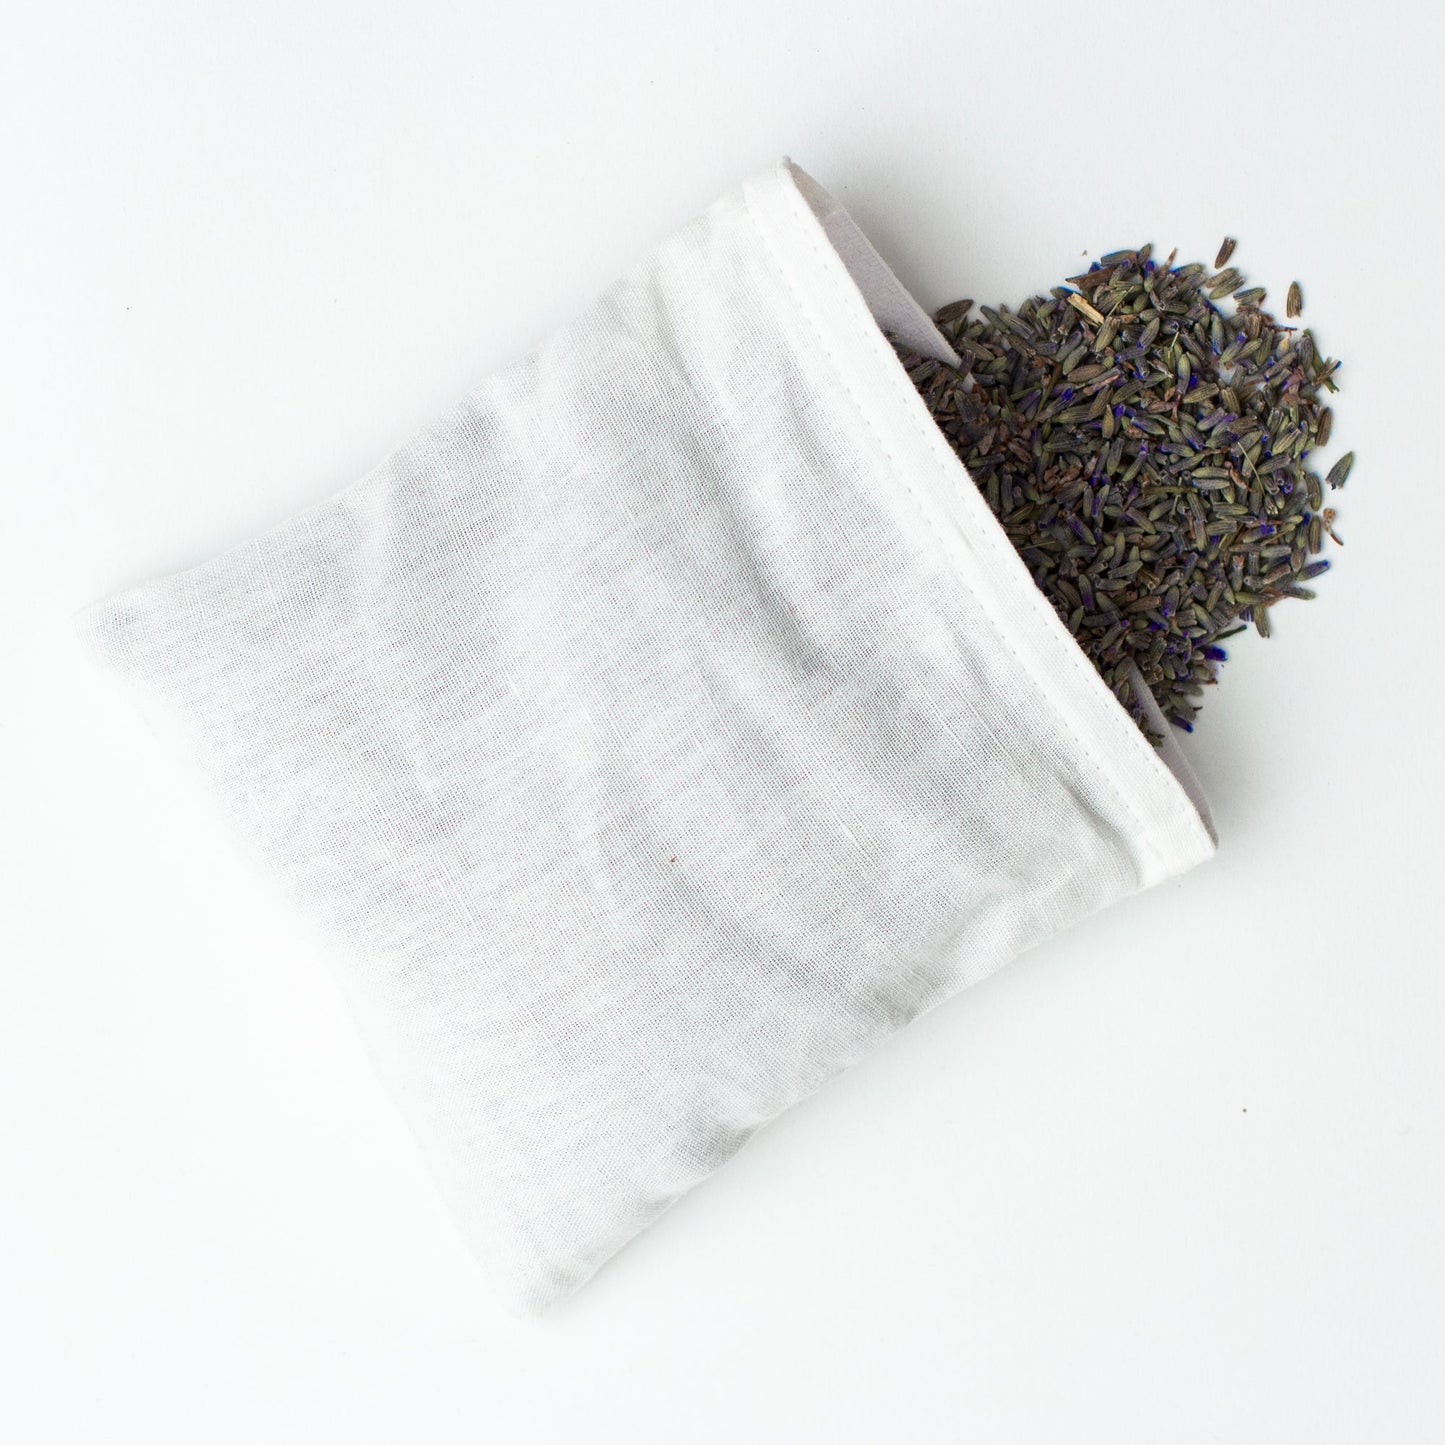 A white linen pouch with lavender spilling out of the open end